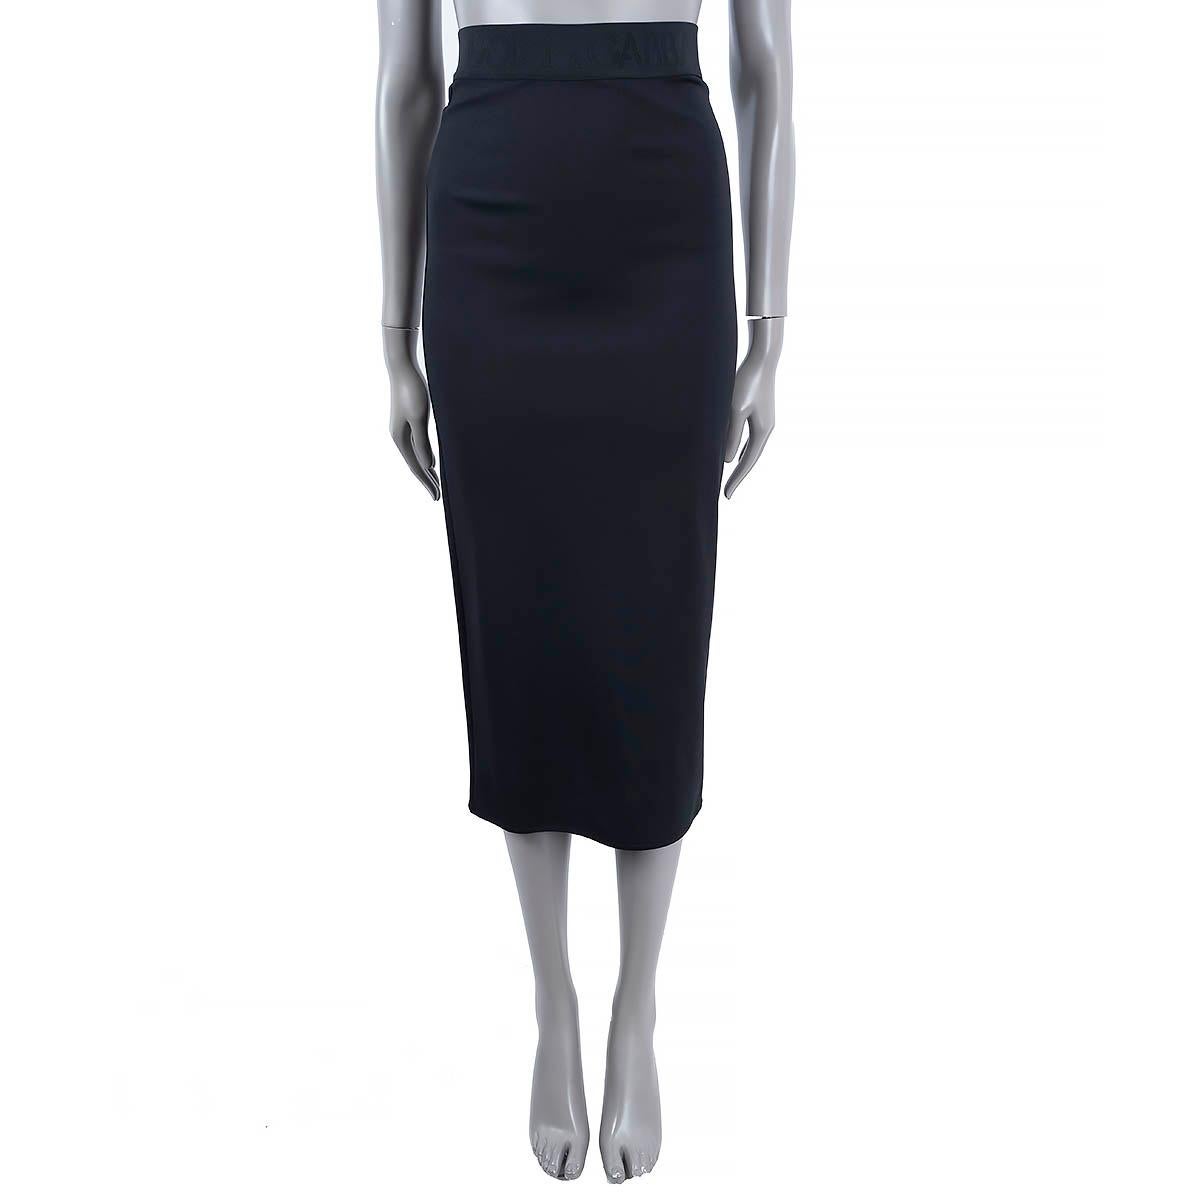 100% authentic Dolce & Gabbana pencil midi skirt in black viscose (75%), polyamide (18%) and elastane (7%). Features an elastic logo waistband and high waist, mid-length pencil silhouette. Closes with a concealed zipper in the back. Unlined. Brand